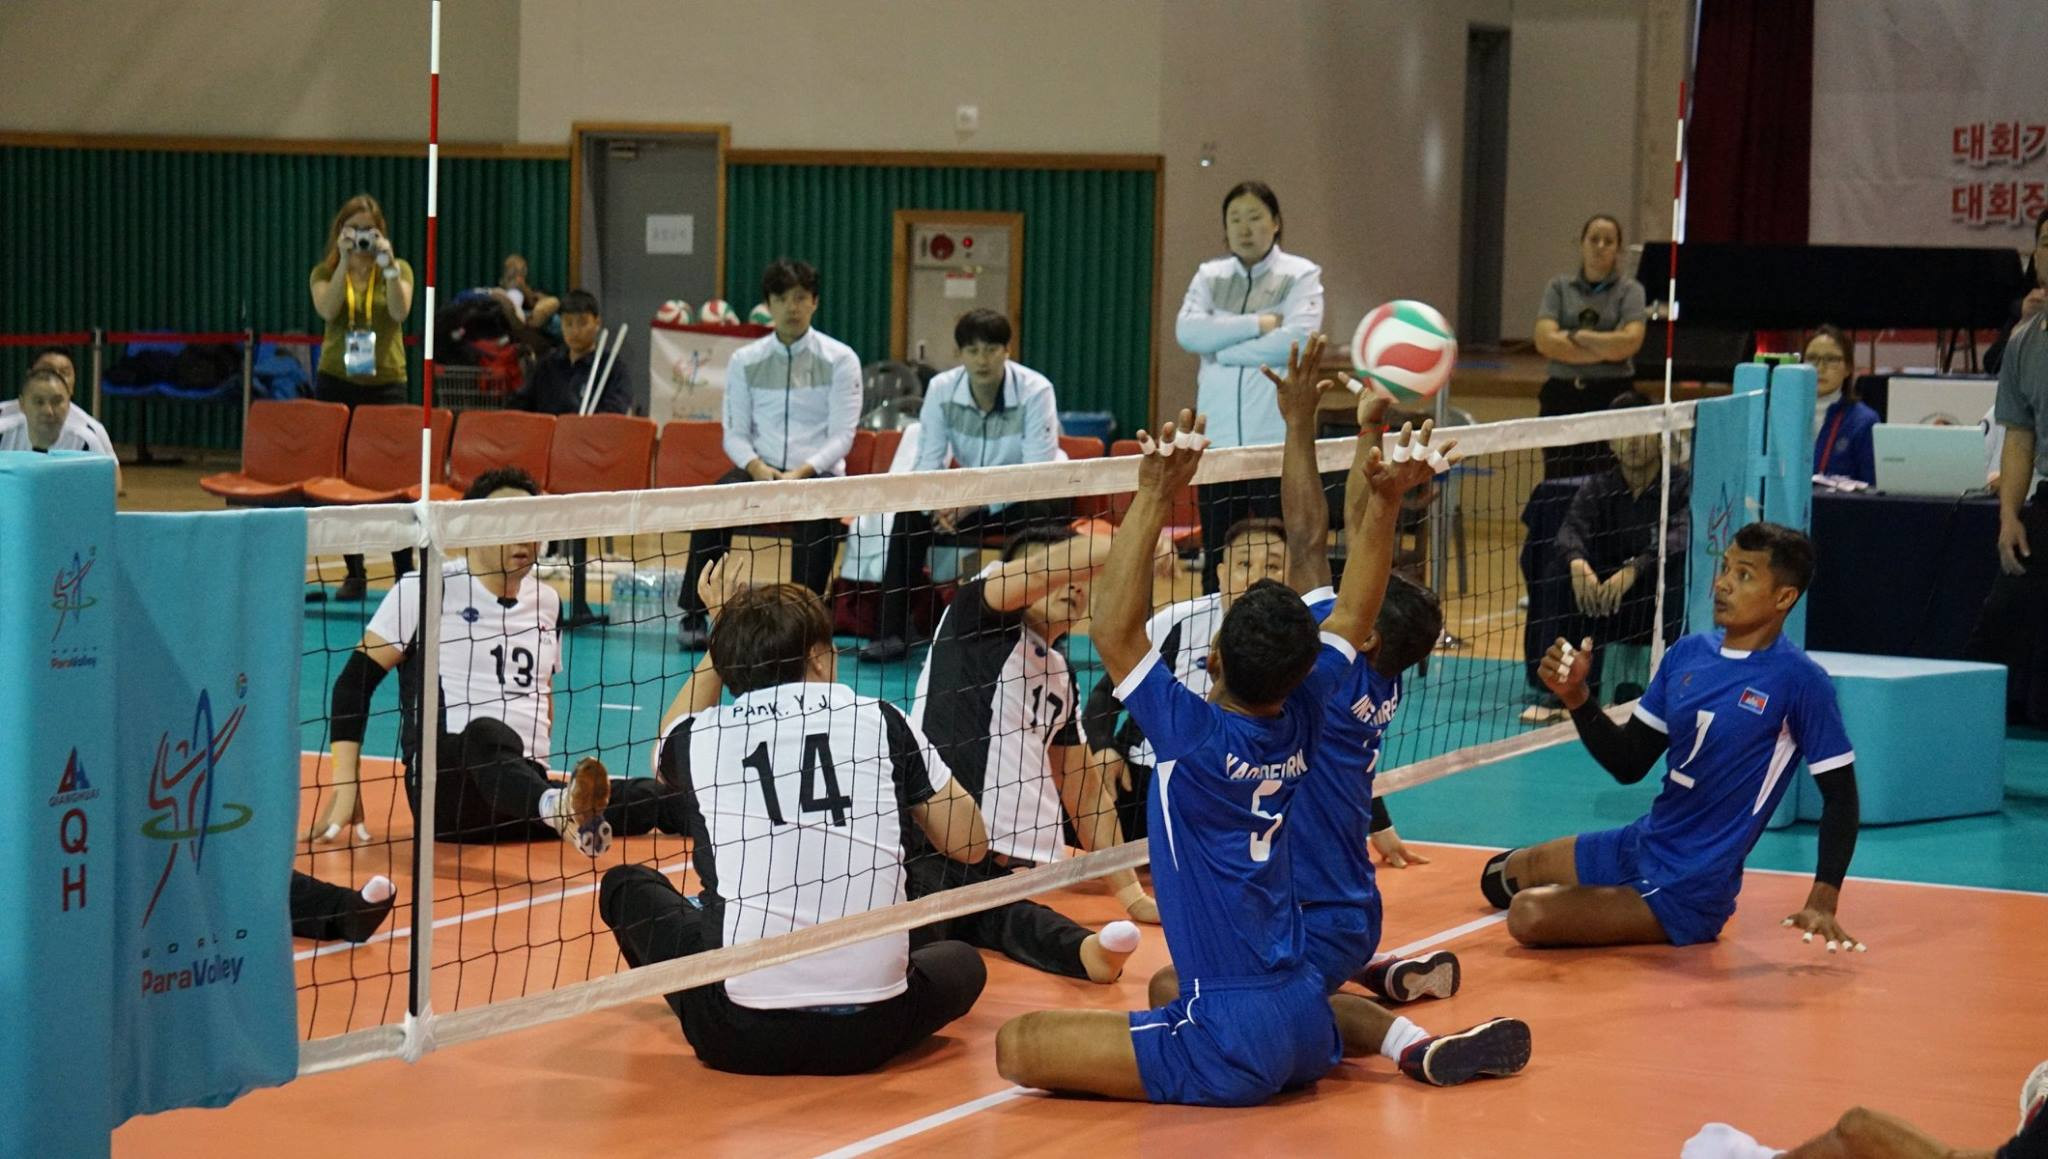 South Korea delight home crowd with second victory in as many games at final qualifier for 2018 Sitting Volleyball World Championships